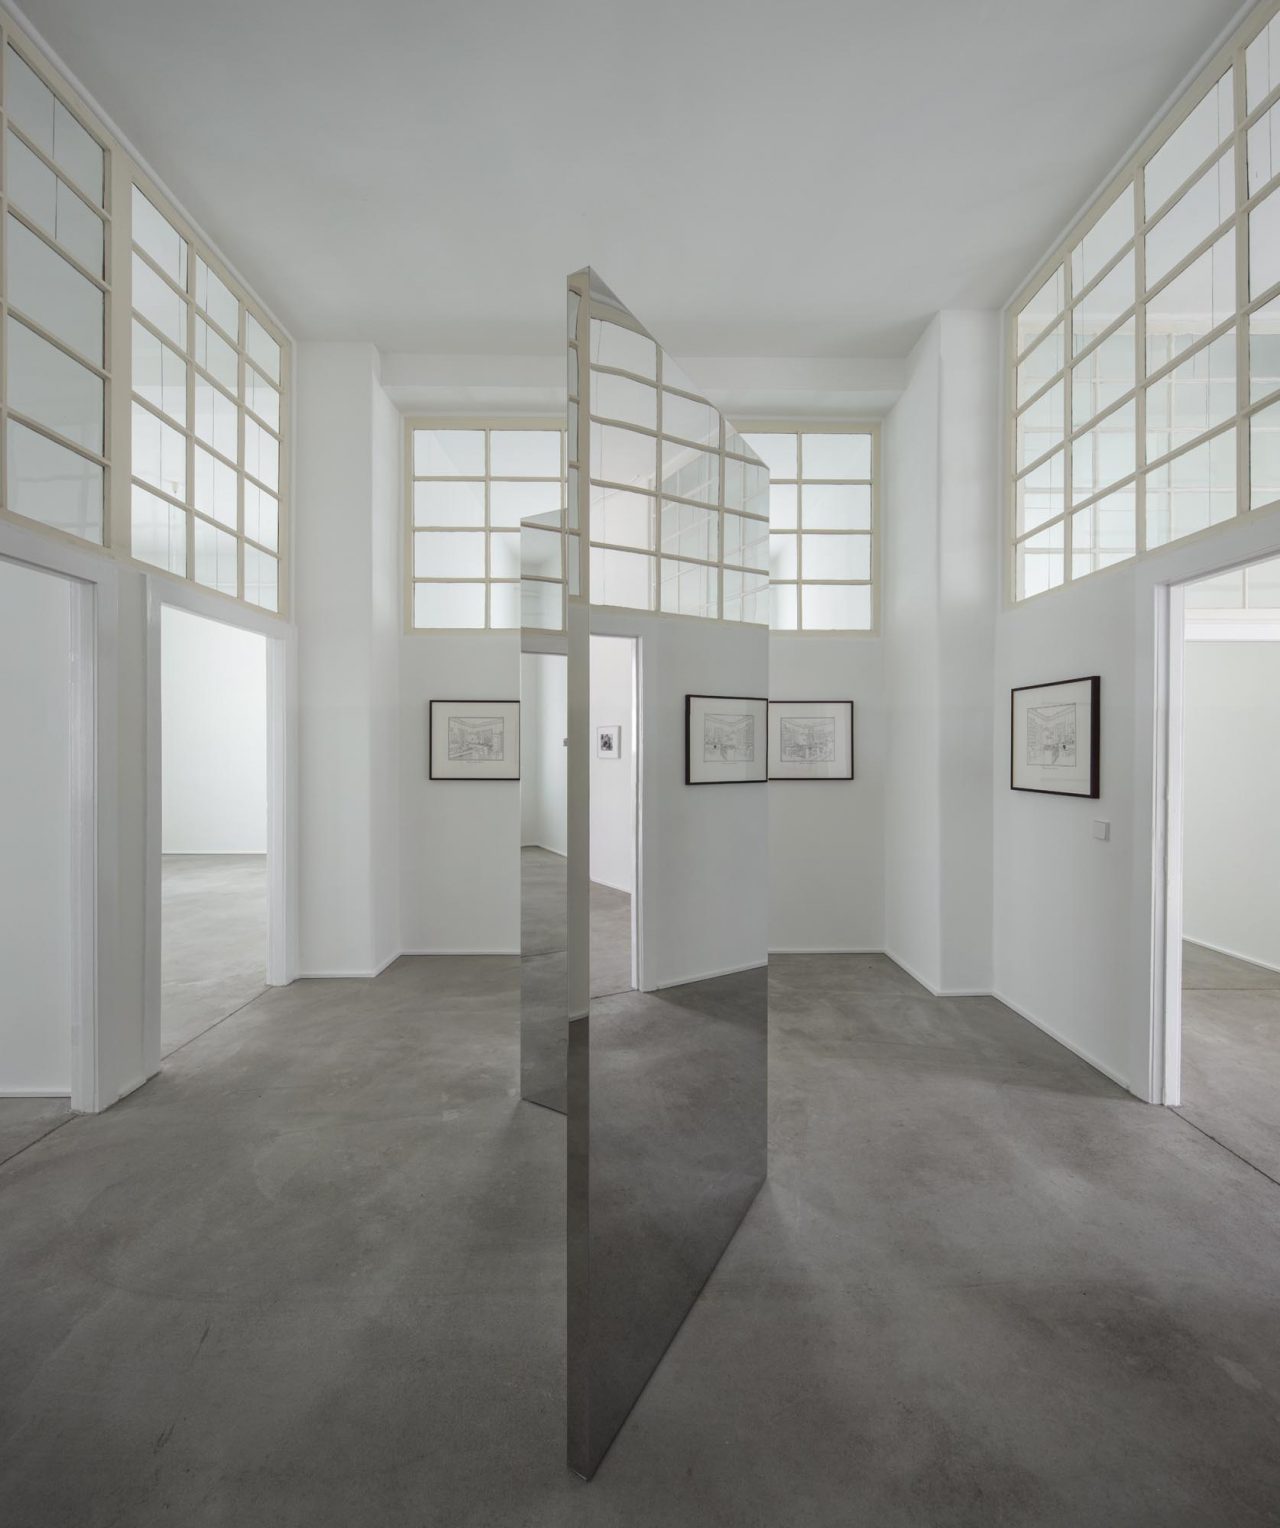 Forerground: Jeppe Hein, Mirror Angle (2005) Background: Rodney Graham, Posters for Interiors, The Berlin Studies of Jacob and Wilhelm Grimm, Drawings Brüder Grimm-Museum, Kassel (1993)